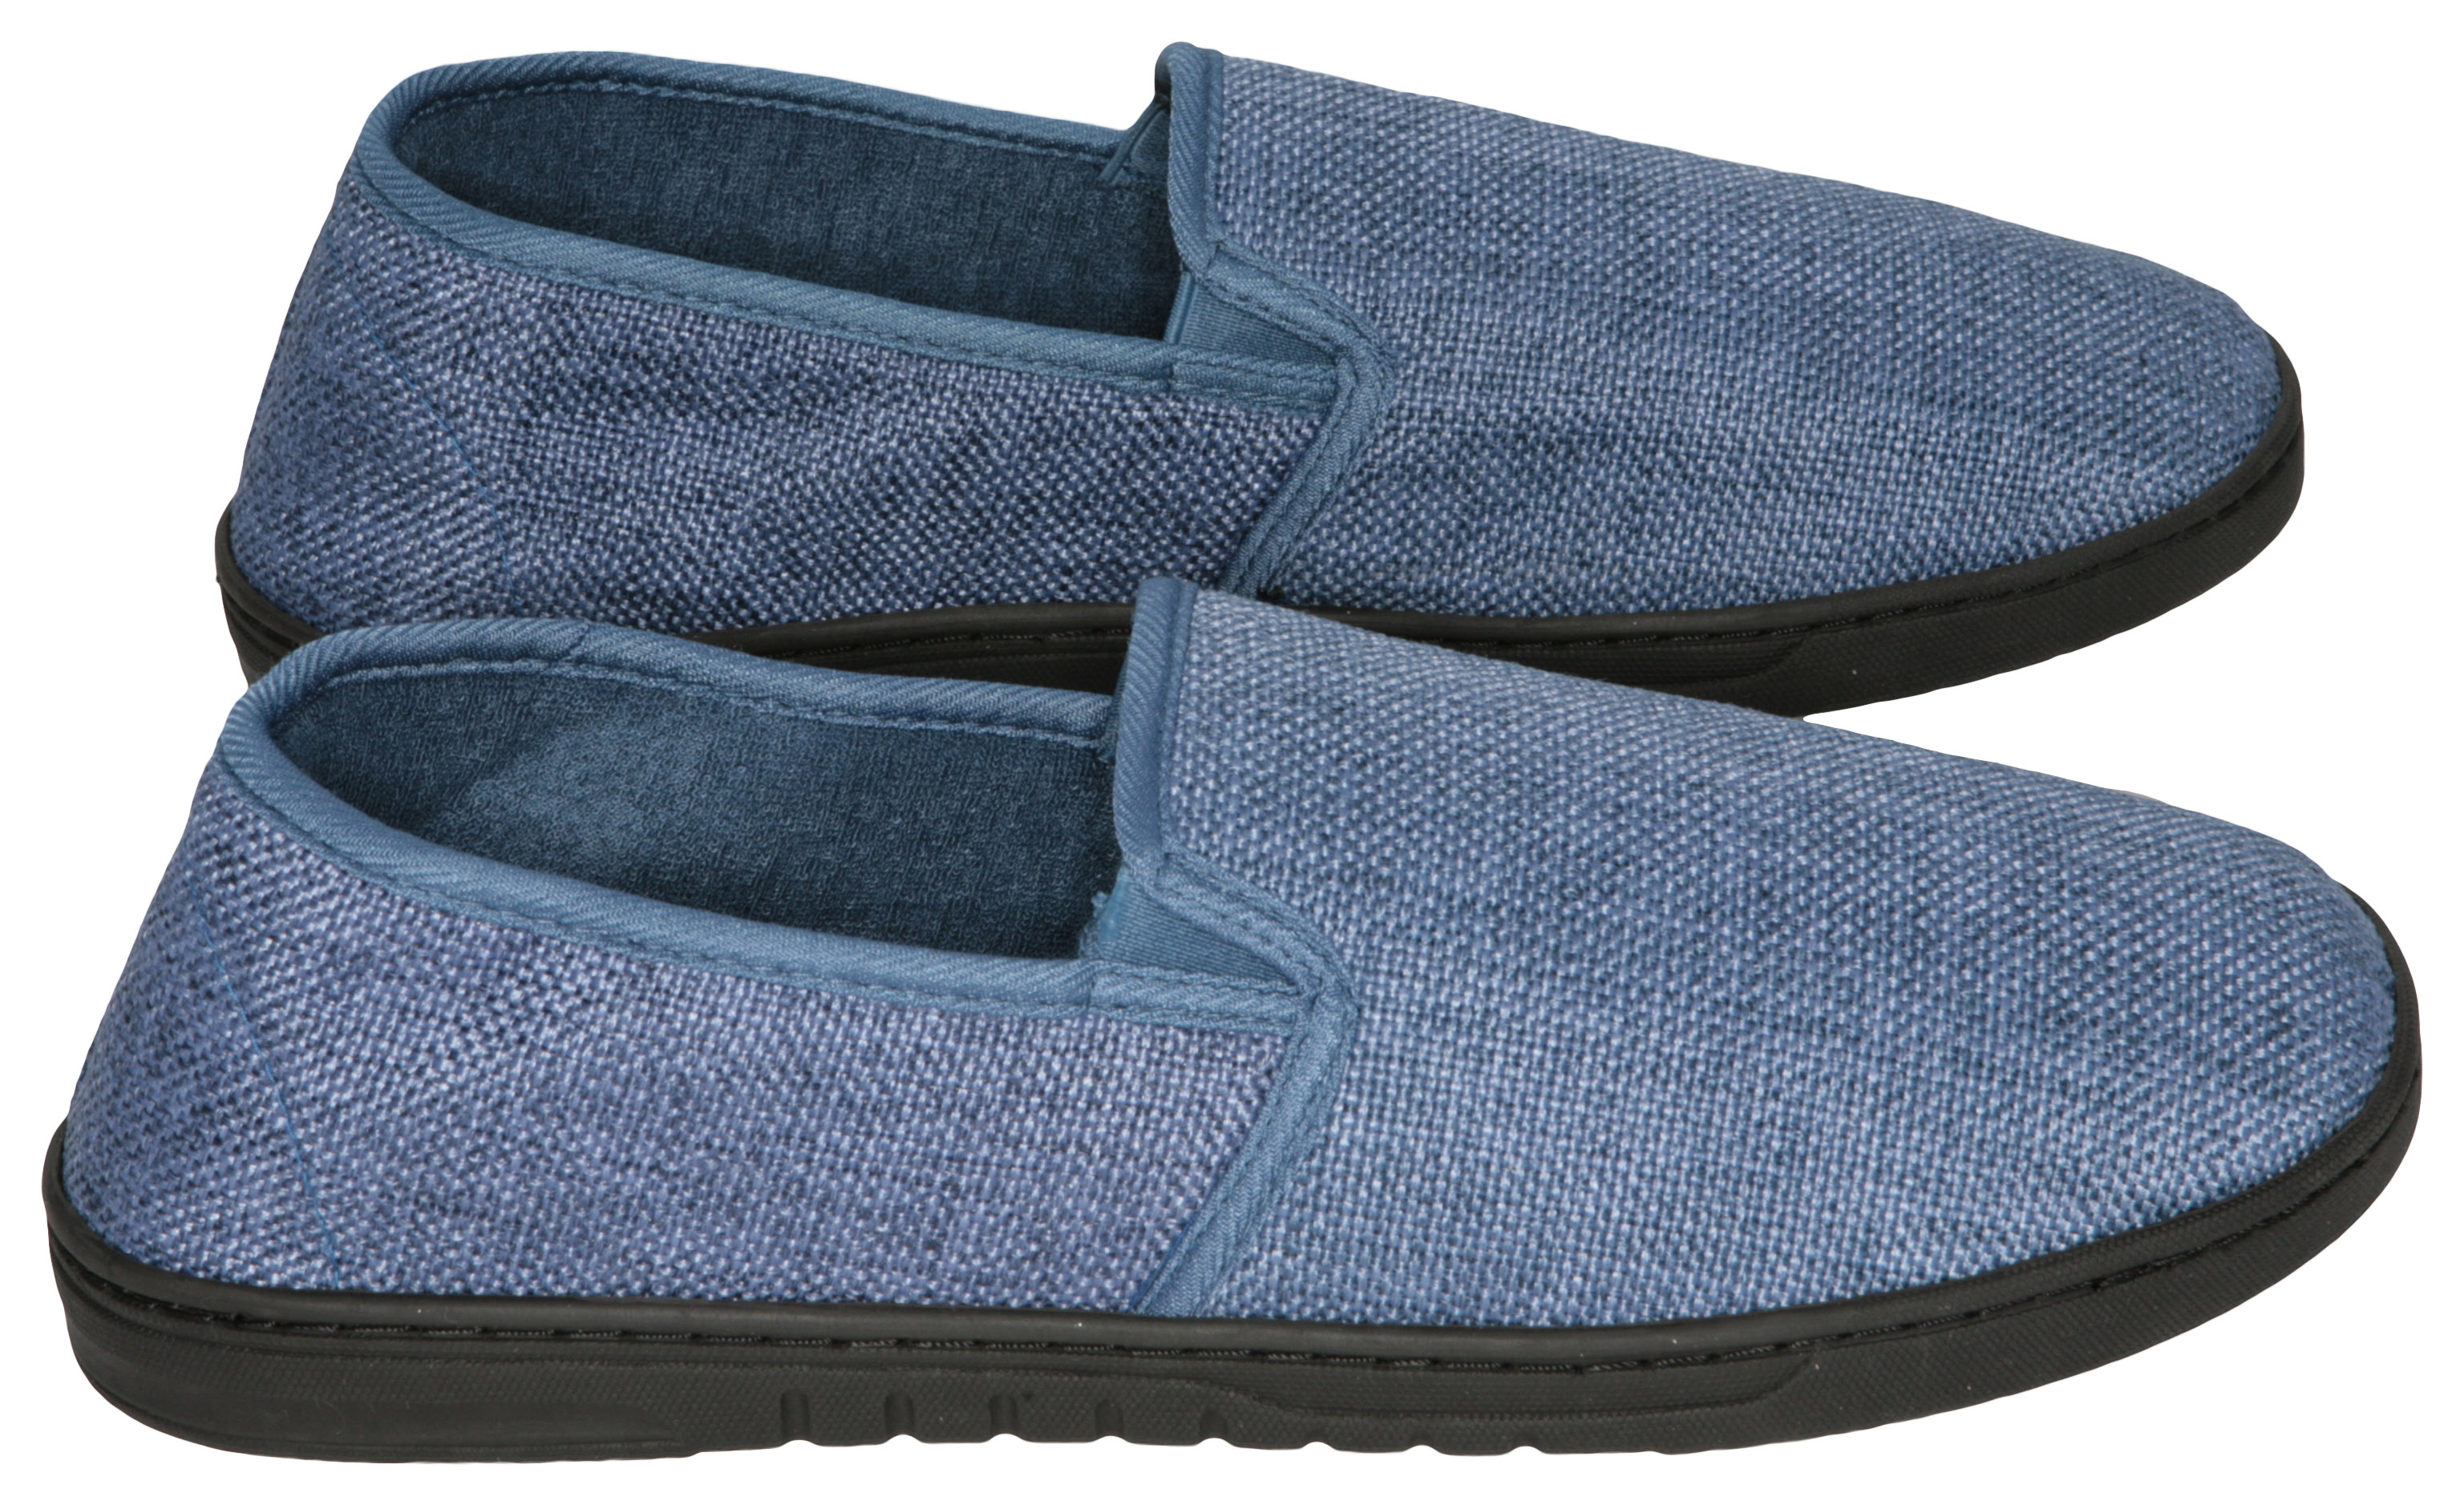 Deluxe Comfort Men's Memory Foam Slipper, Size 11-12 – Soft Linen 120D SBR Insole and Rubber Outsole – Pure Suede Shoes – Non-Marking Sole – Men's Slippers, Blue - image 2 of 5